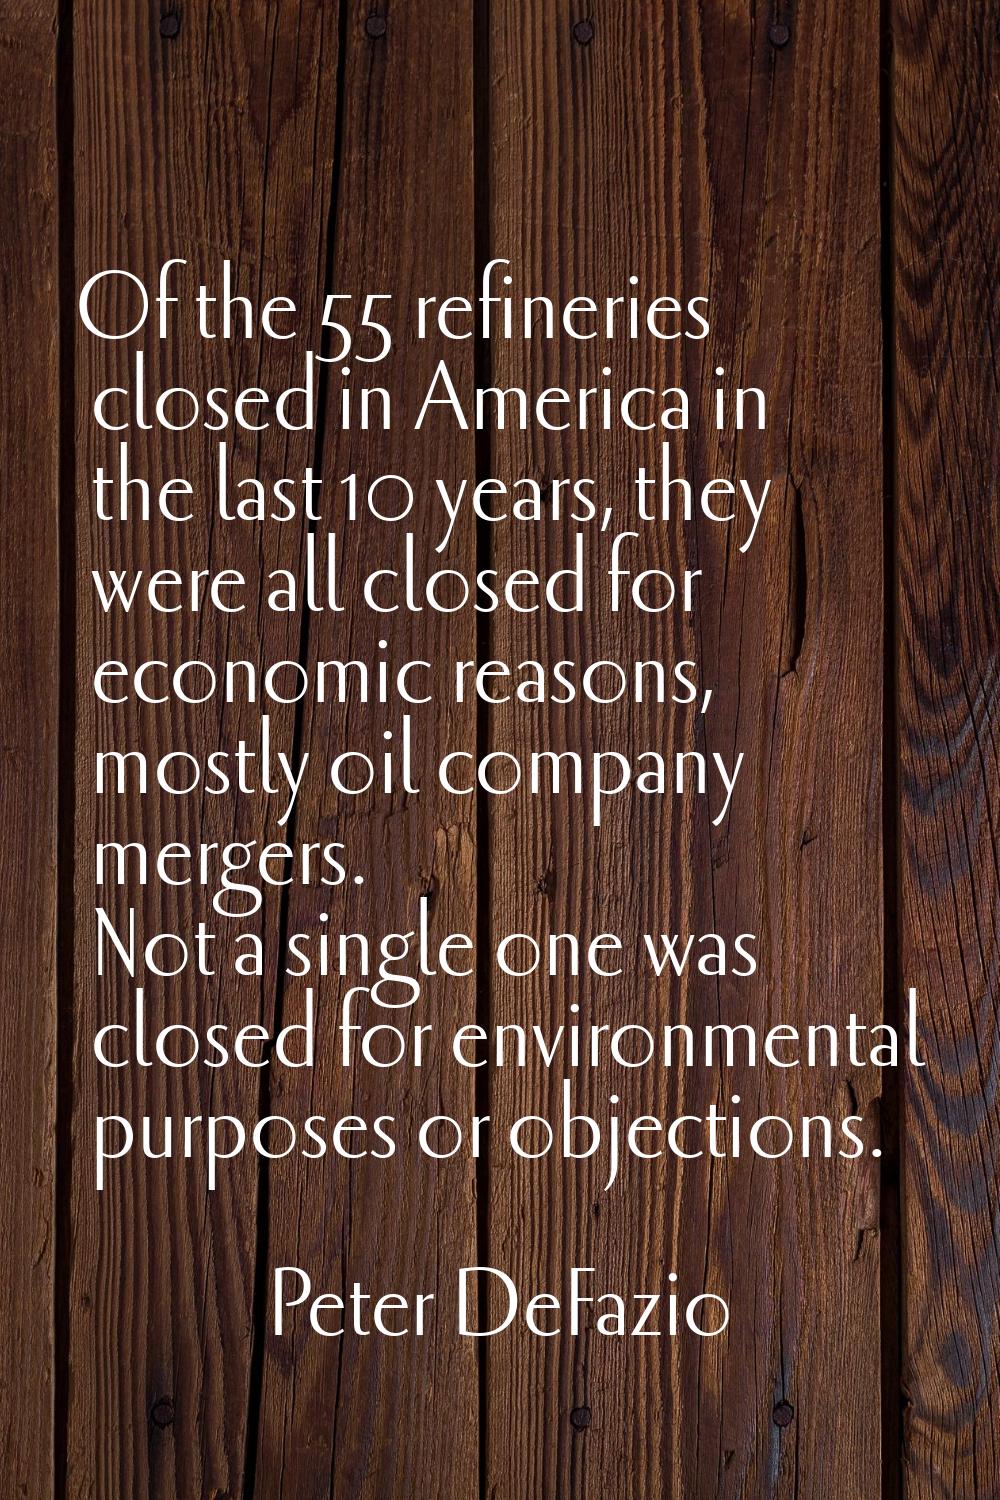 Of the 55 refineries closed in America in the last 10 years, they were all closed for economic reas